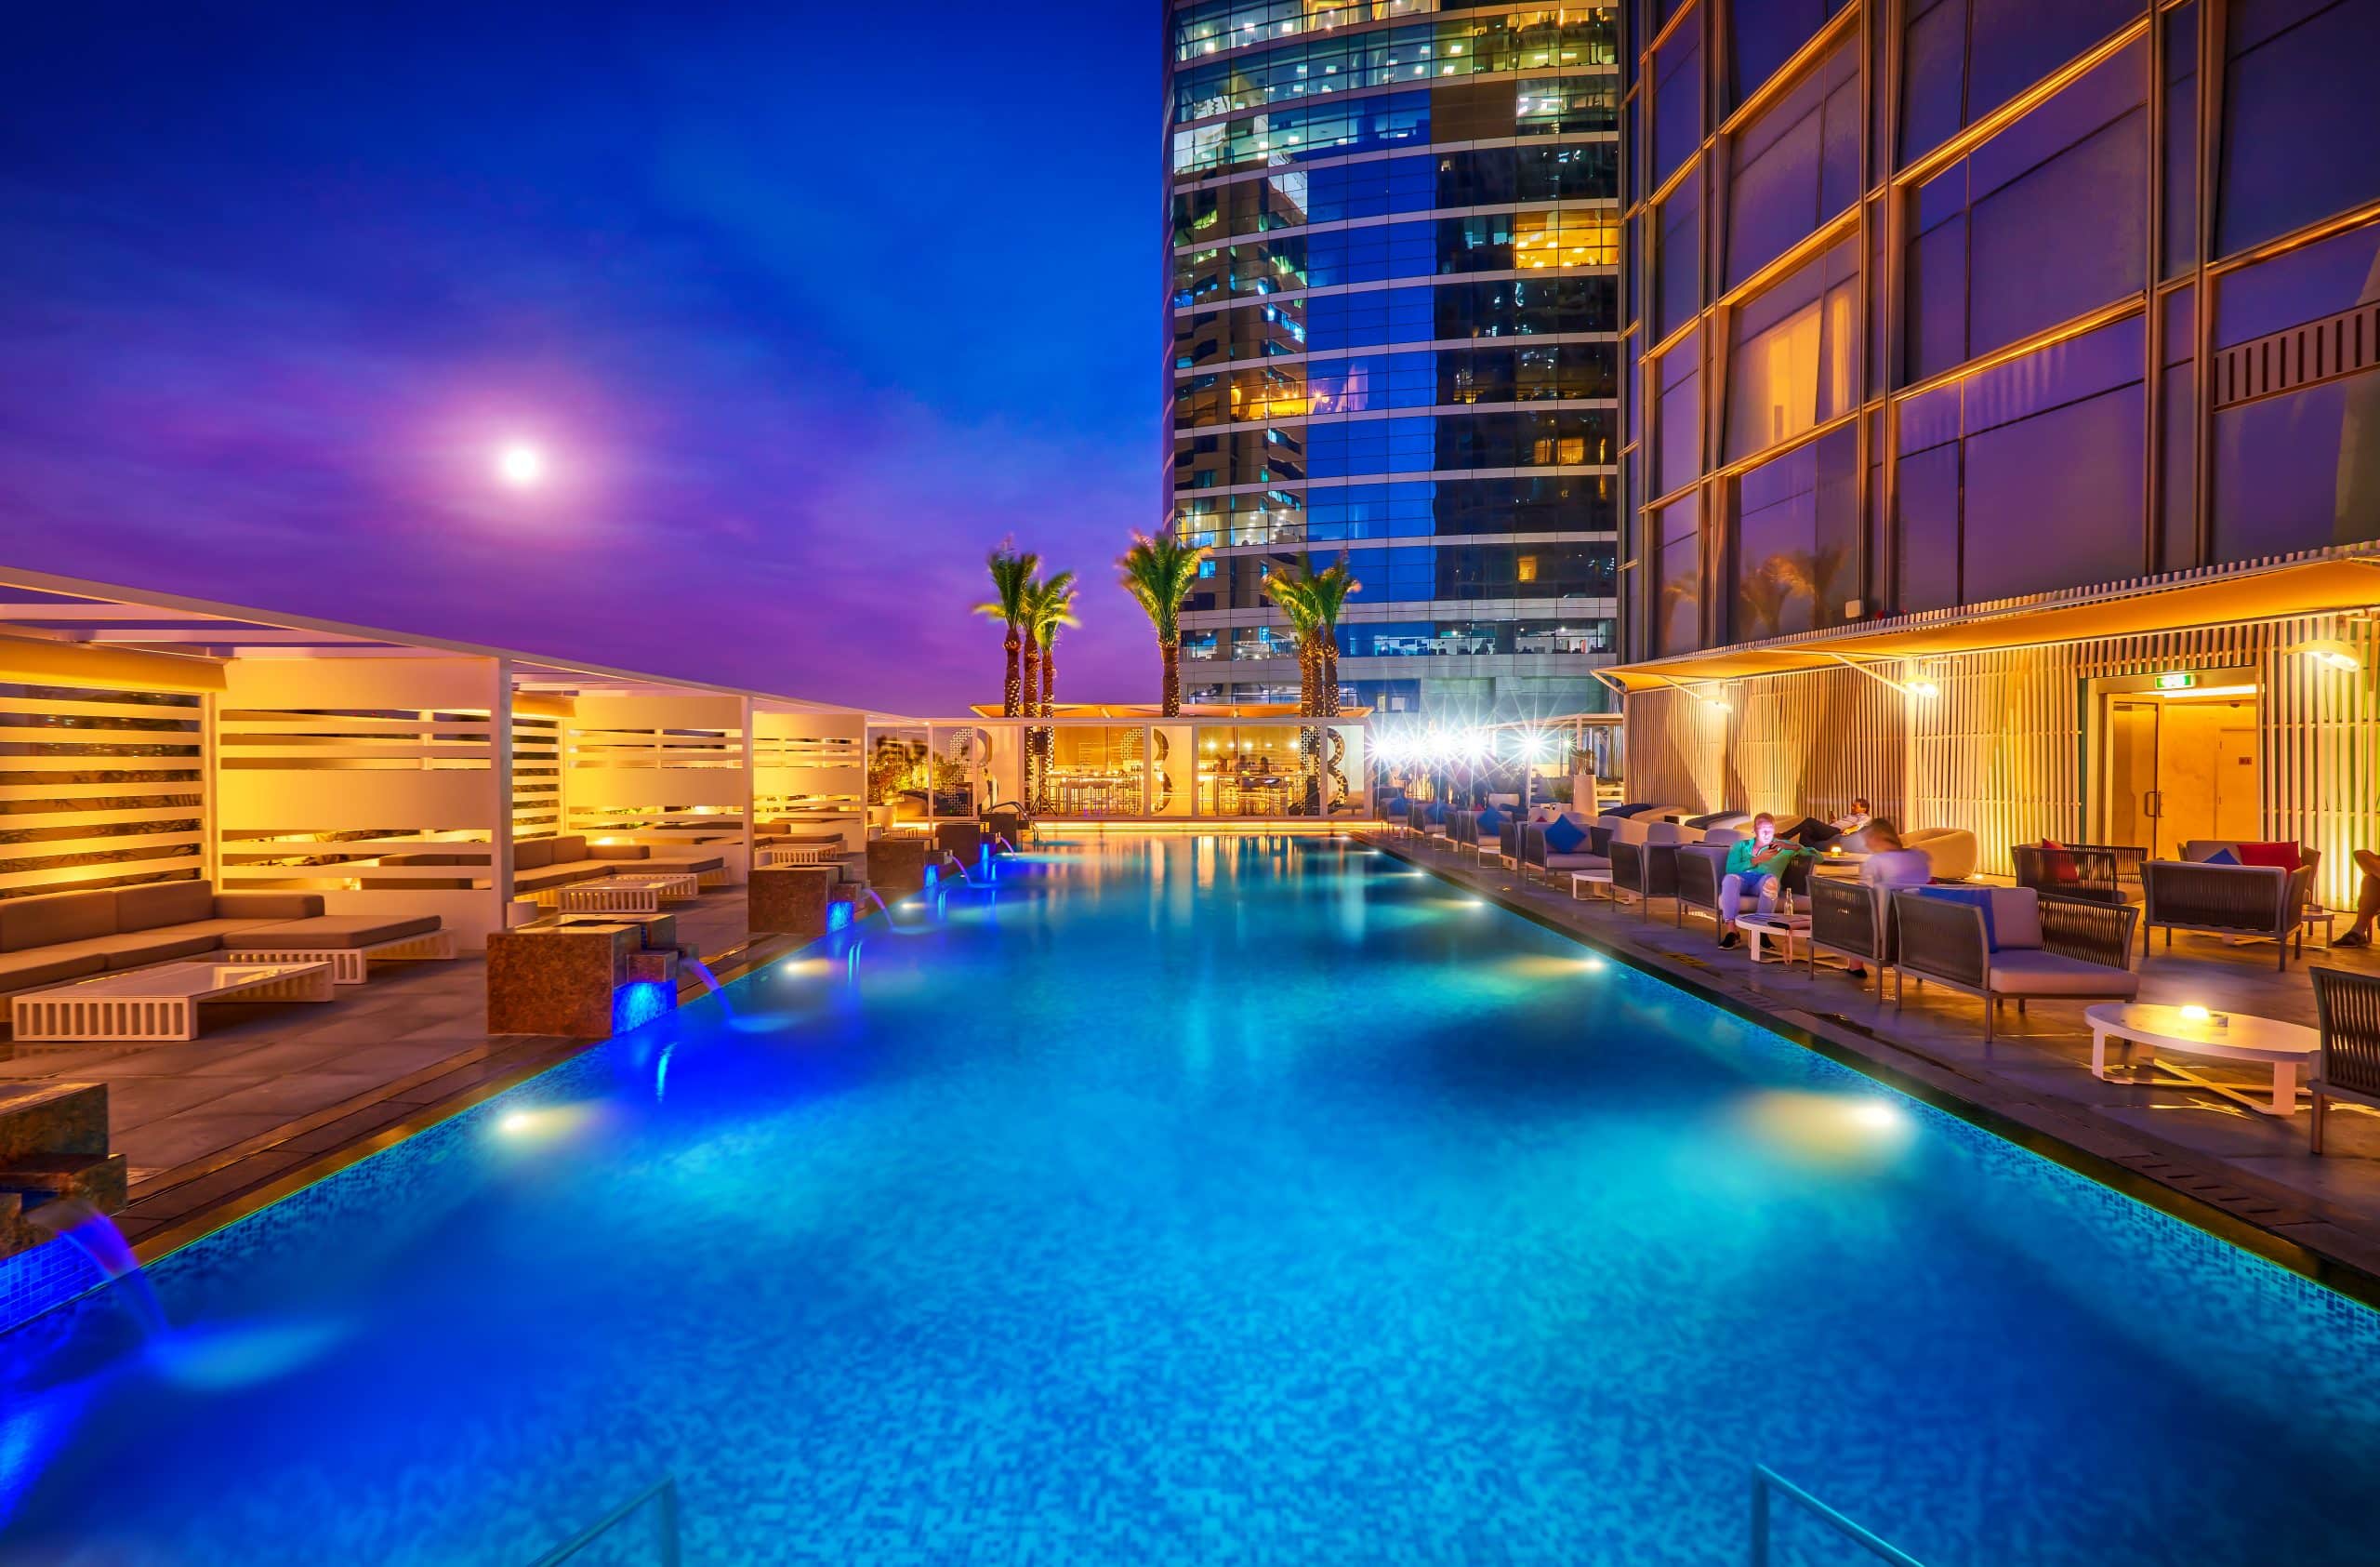 Hotels With Indoor Pools in Dubai